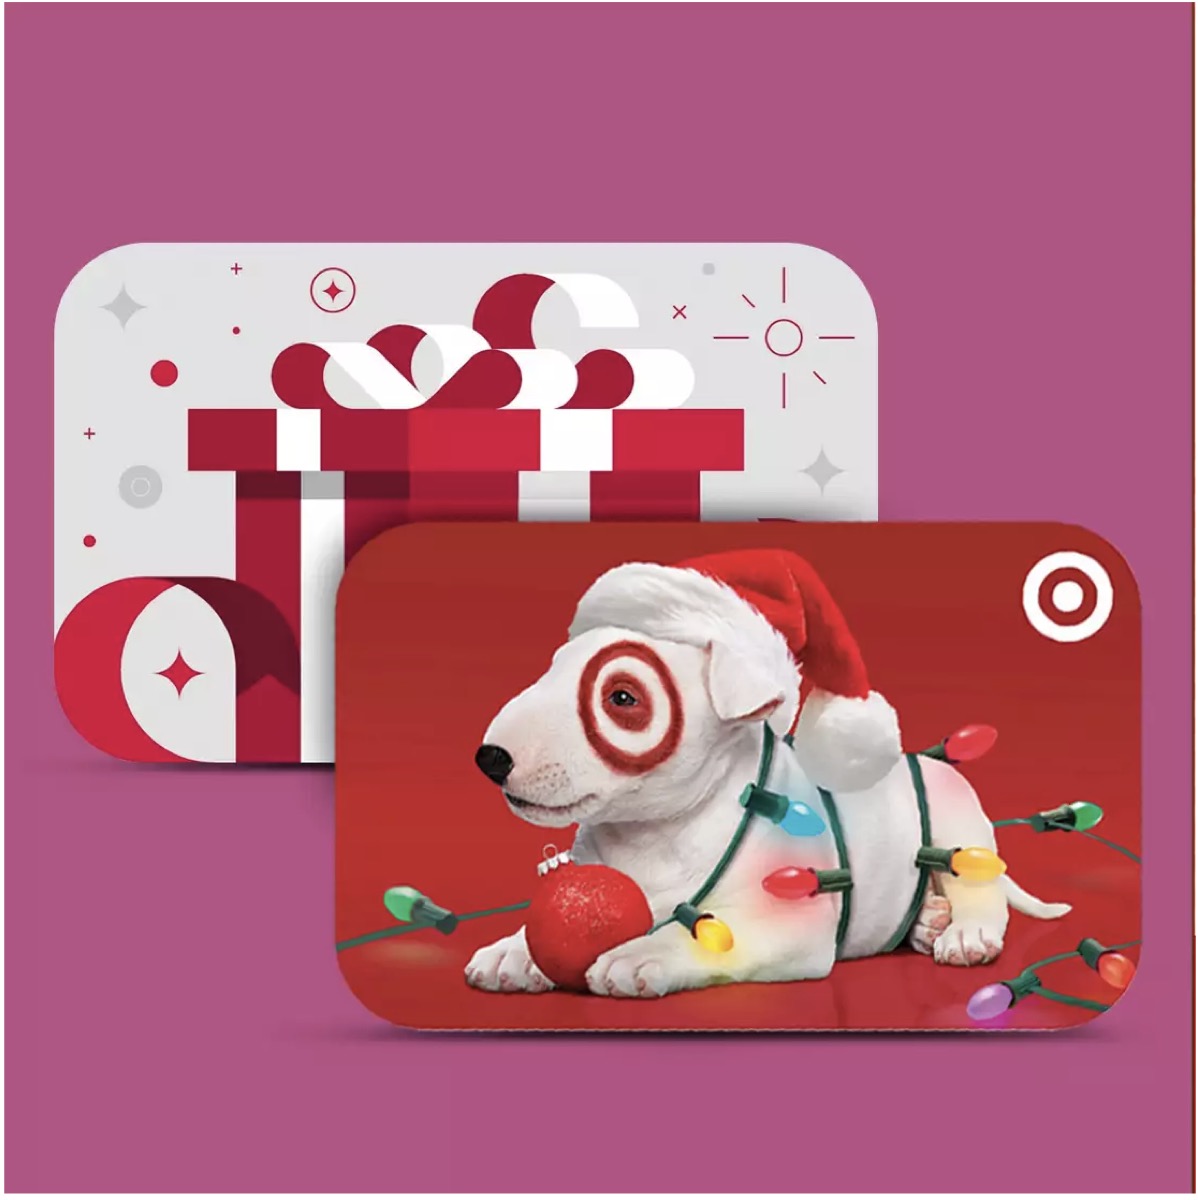 target gift cards